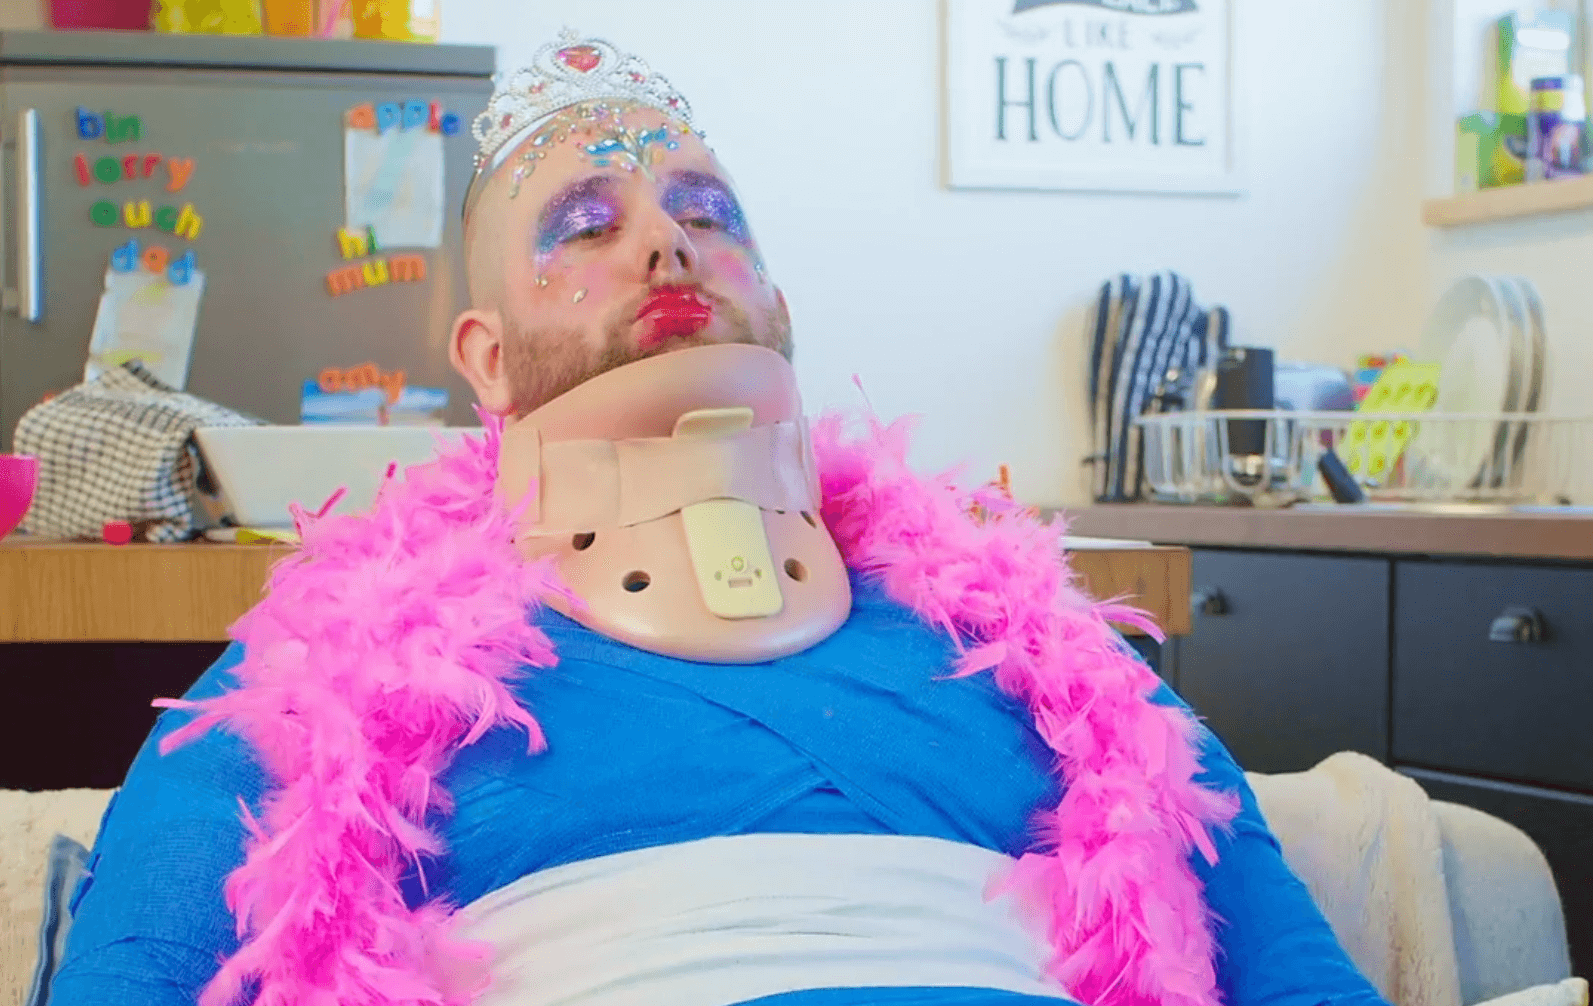 Man wearing a neck brace, pink feather boa, tiara, and heavy makeup, sitting in a kitchen with a sign "HOME" in the background.